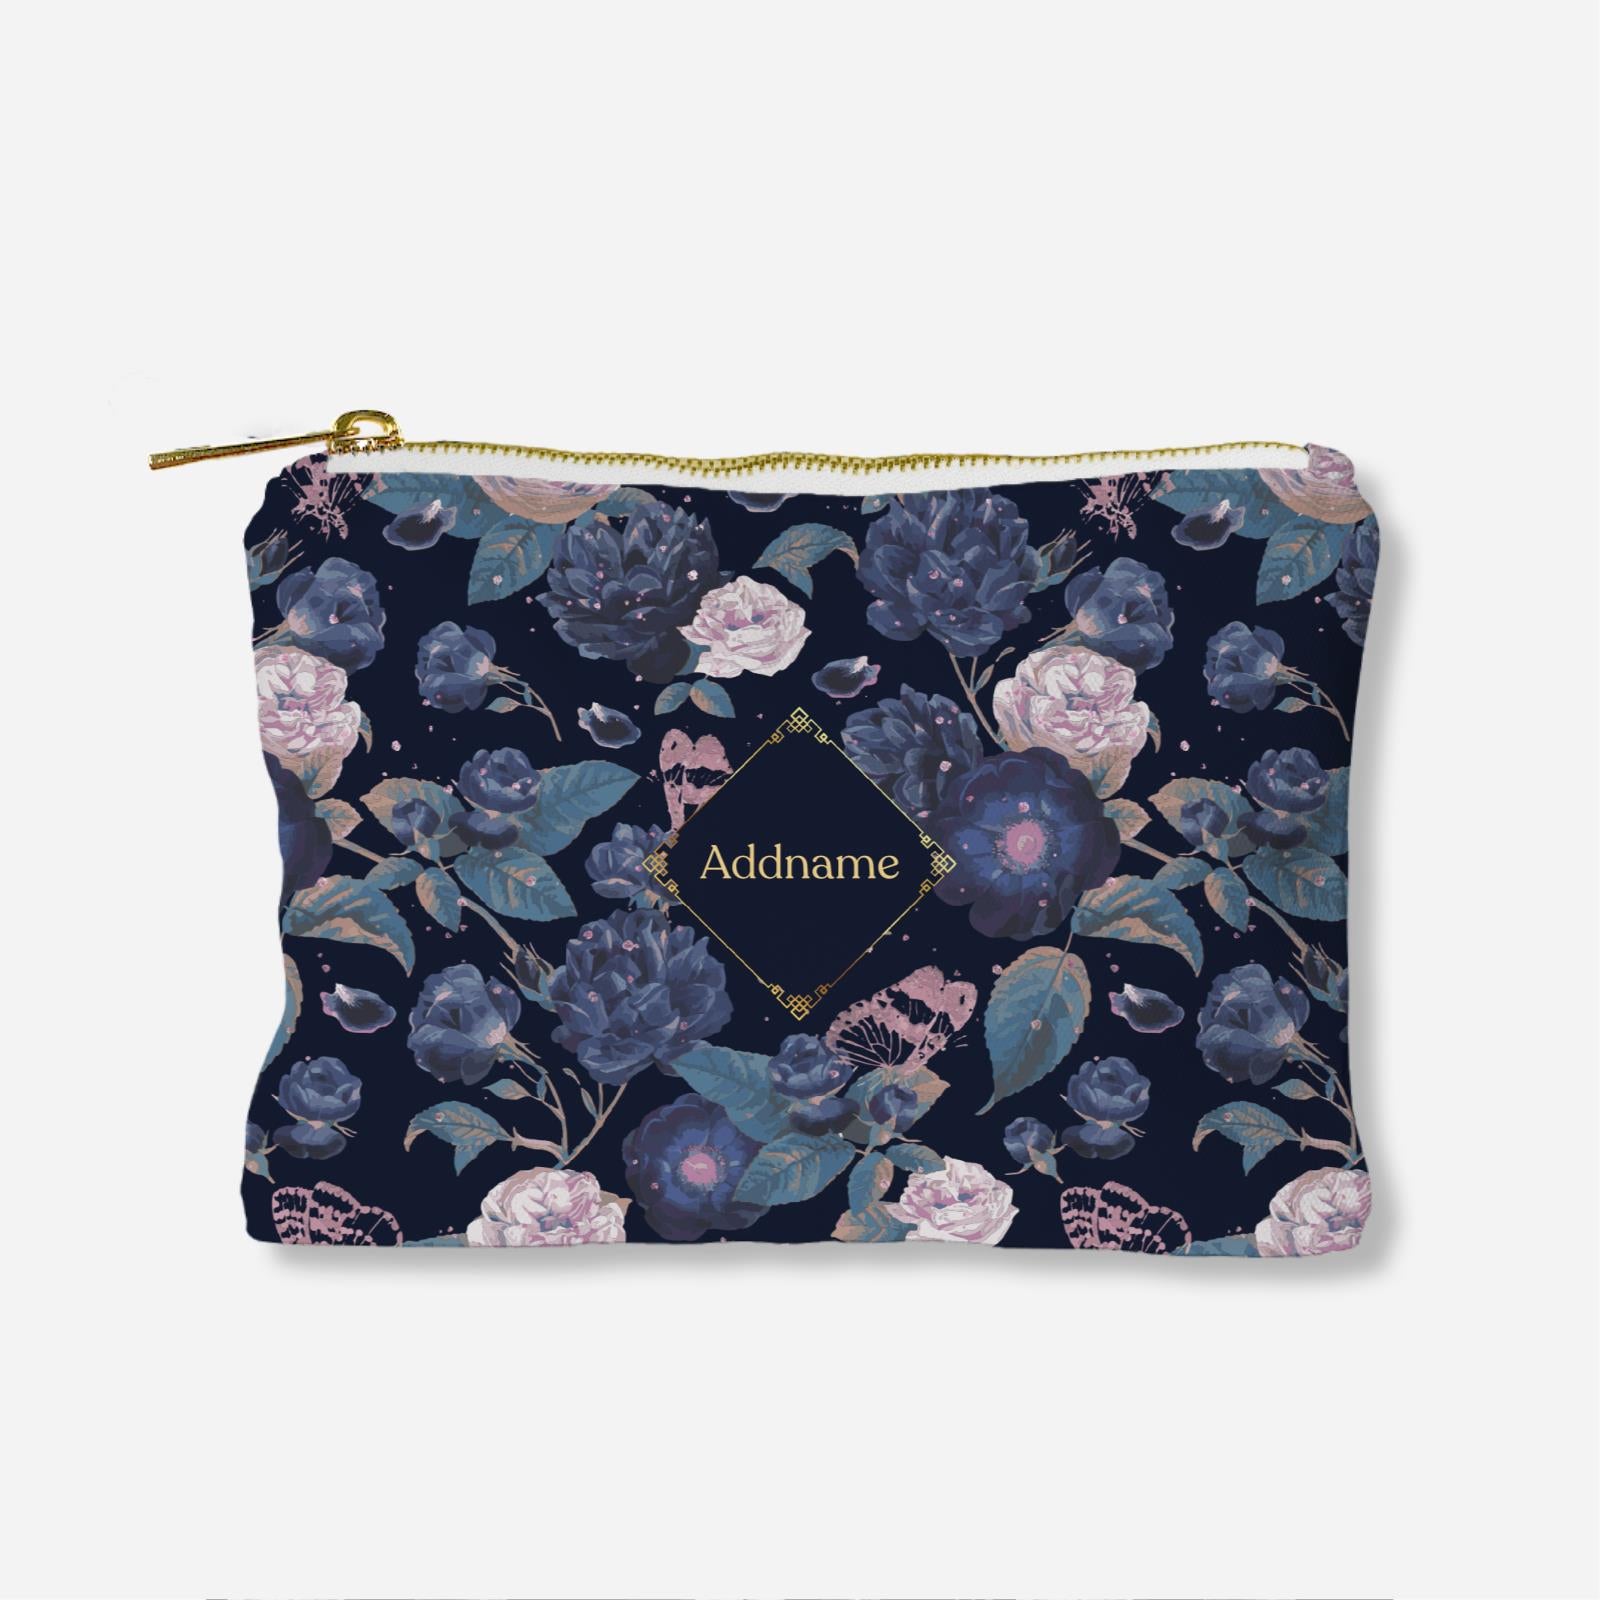 Royal Floral Series - Serene Moonlight Full Print Zipper Pouch With English Personalization